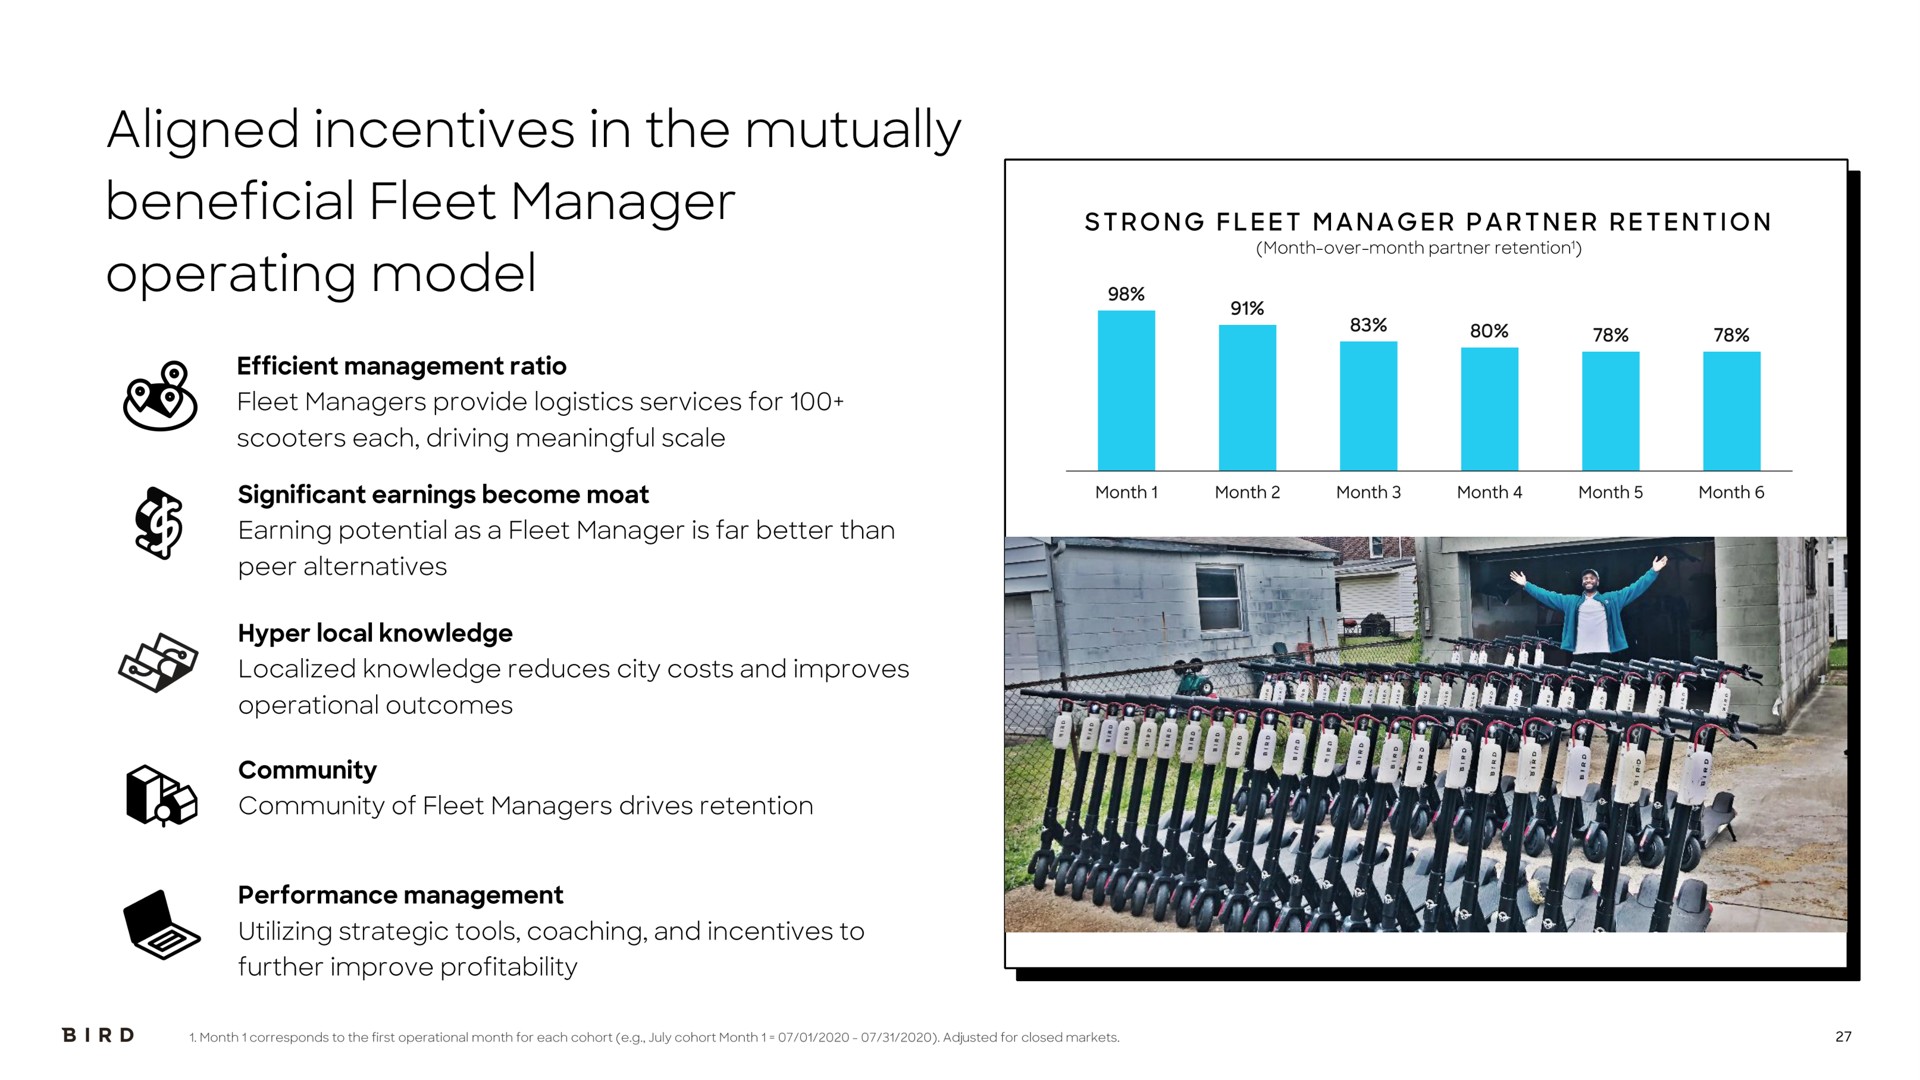 aligned incentives in the mutually beneficial fleet manager operating model lee peep | Bird